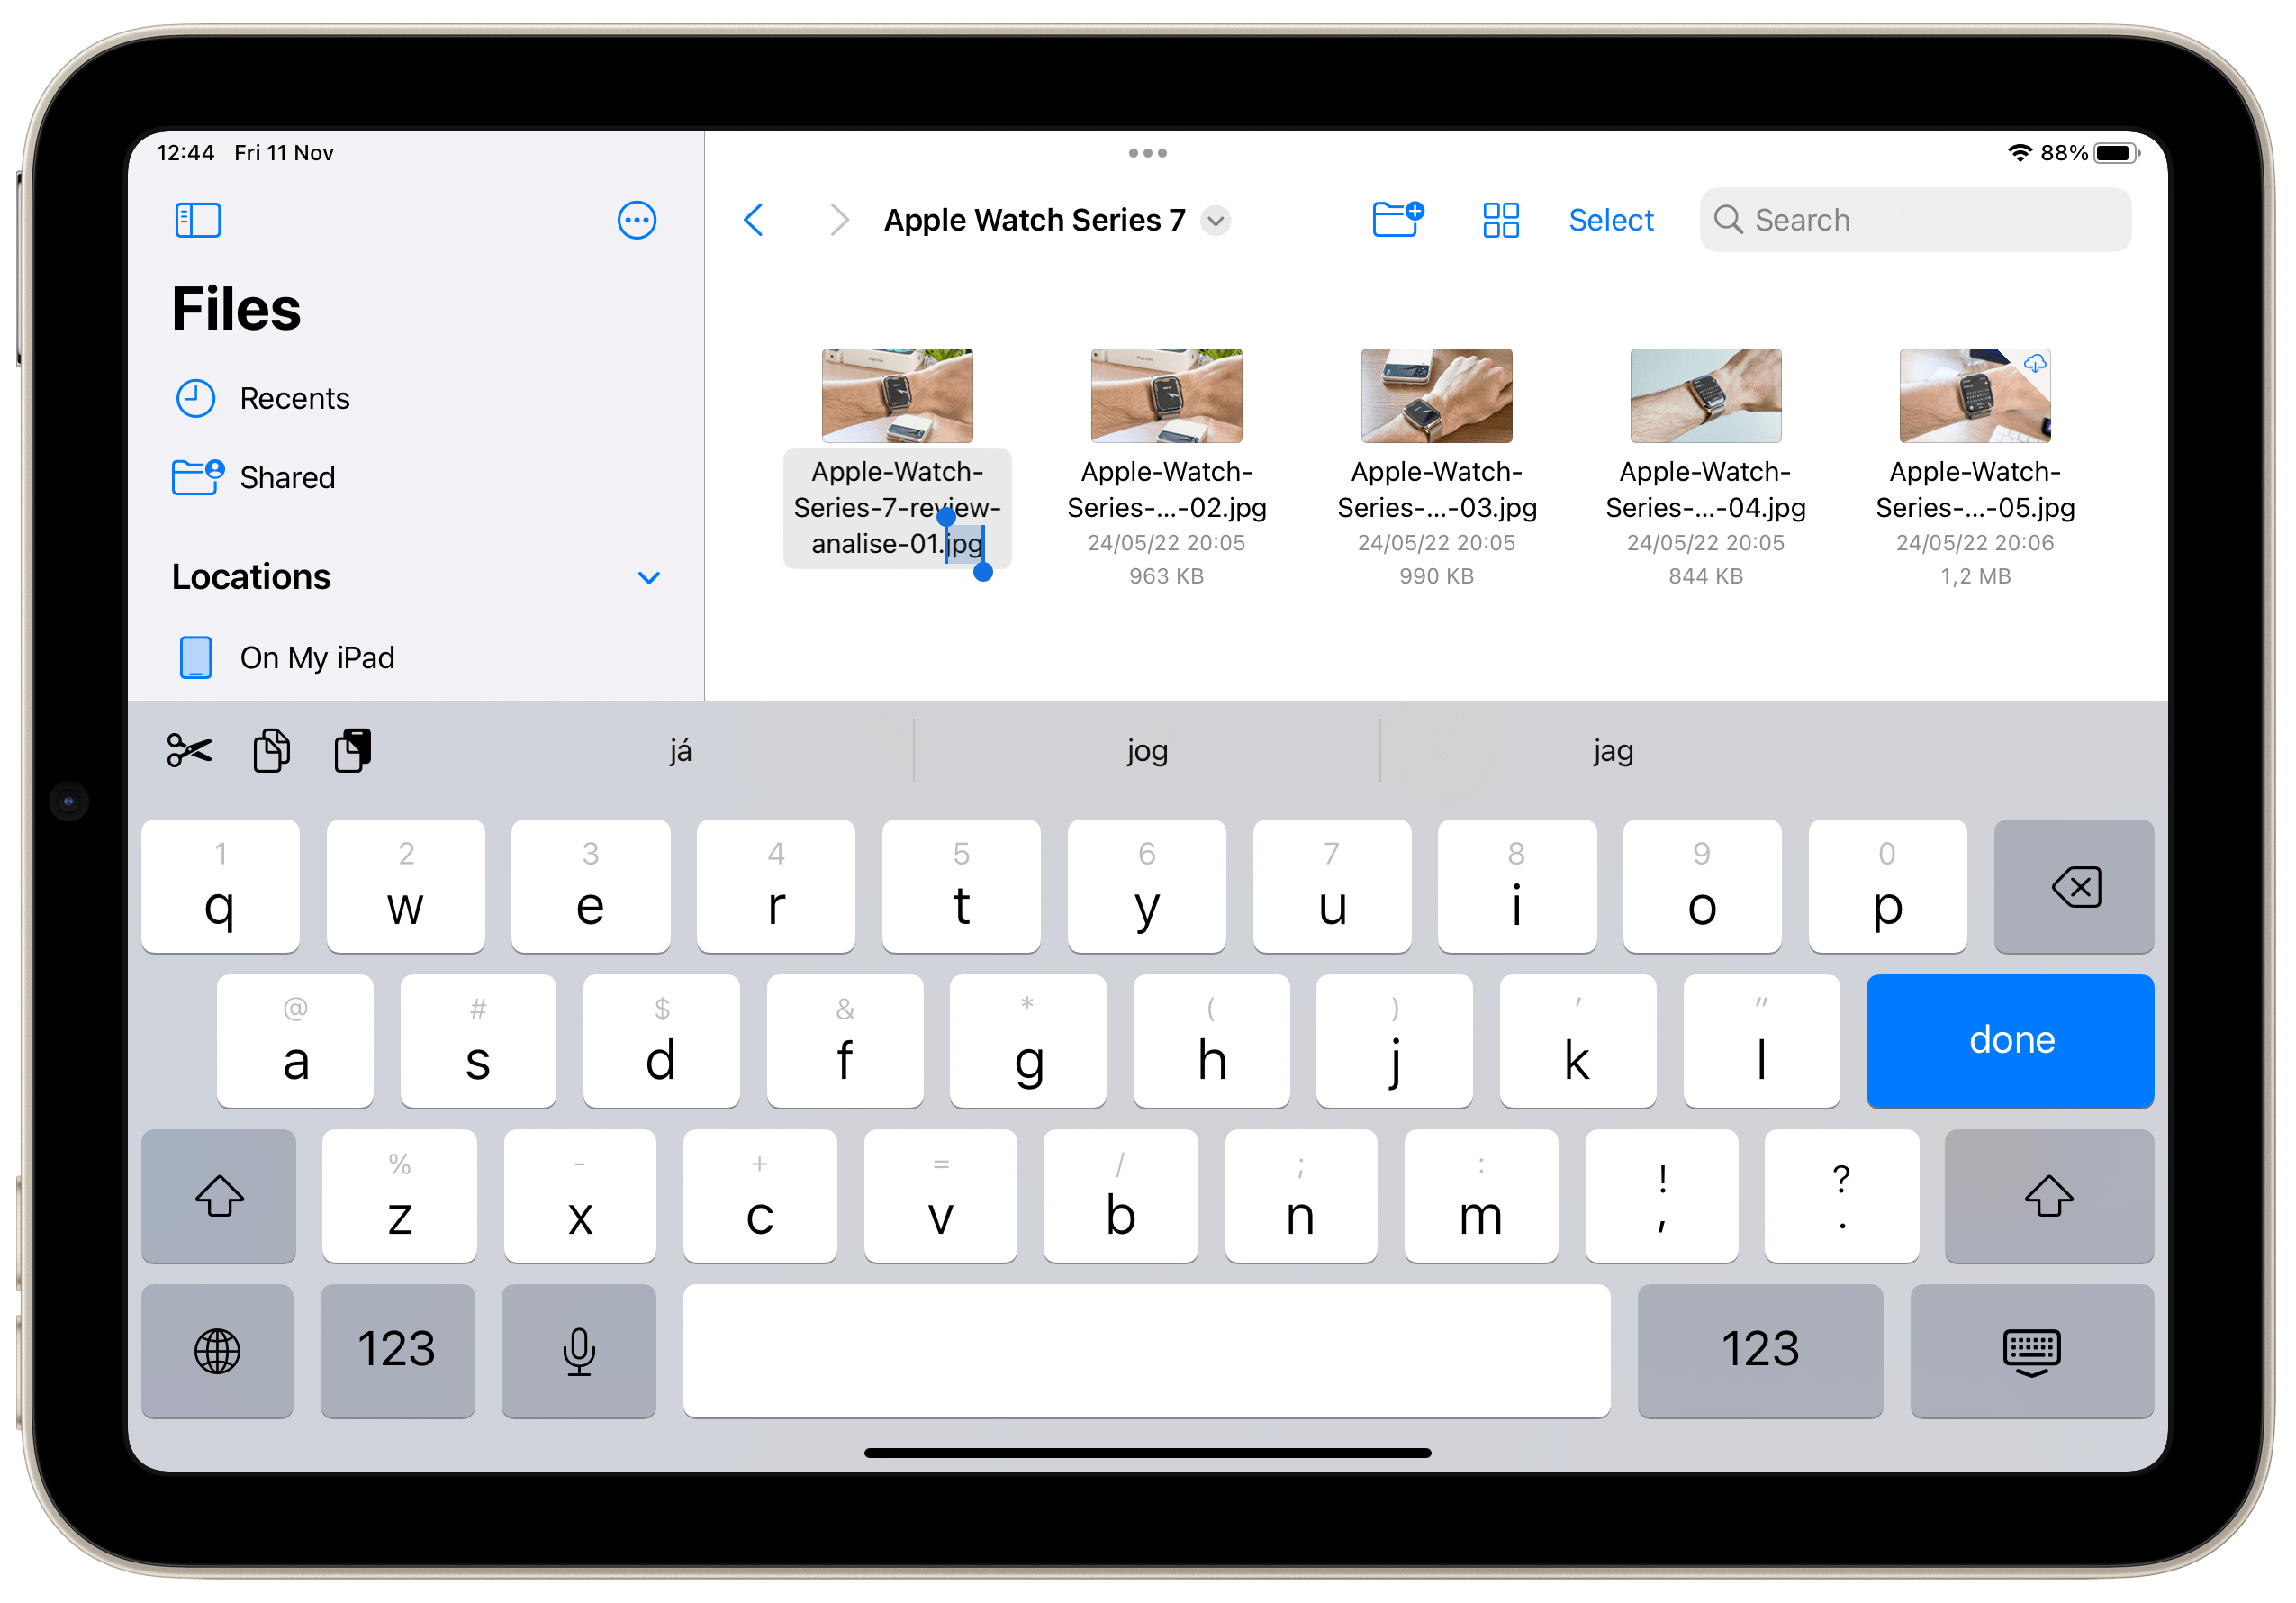 How to use the new features of the Files app in iPadOS 16